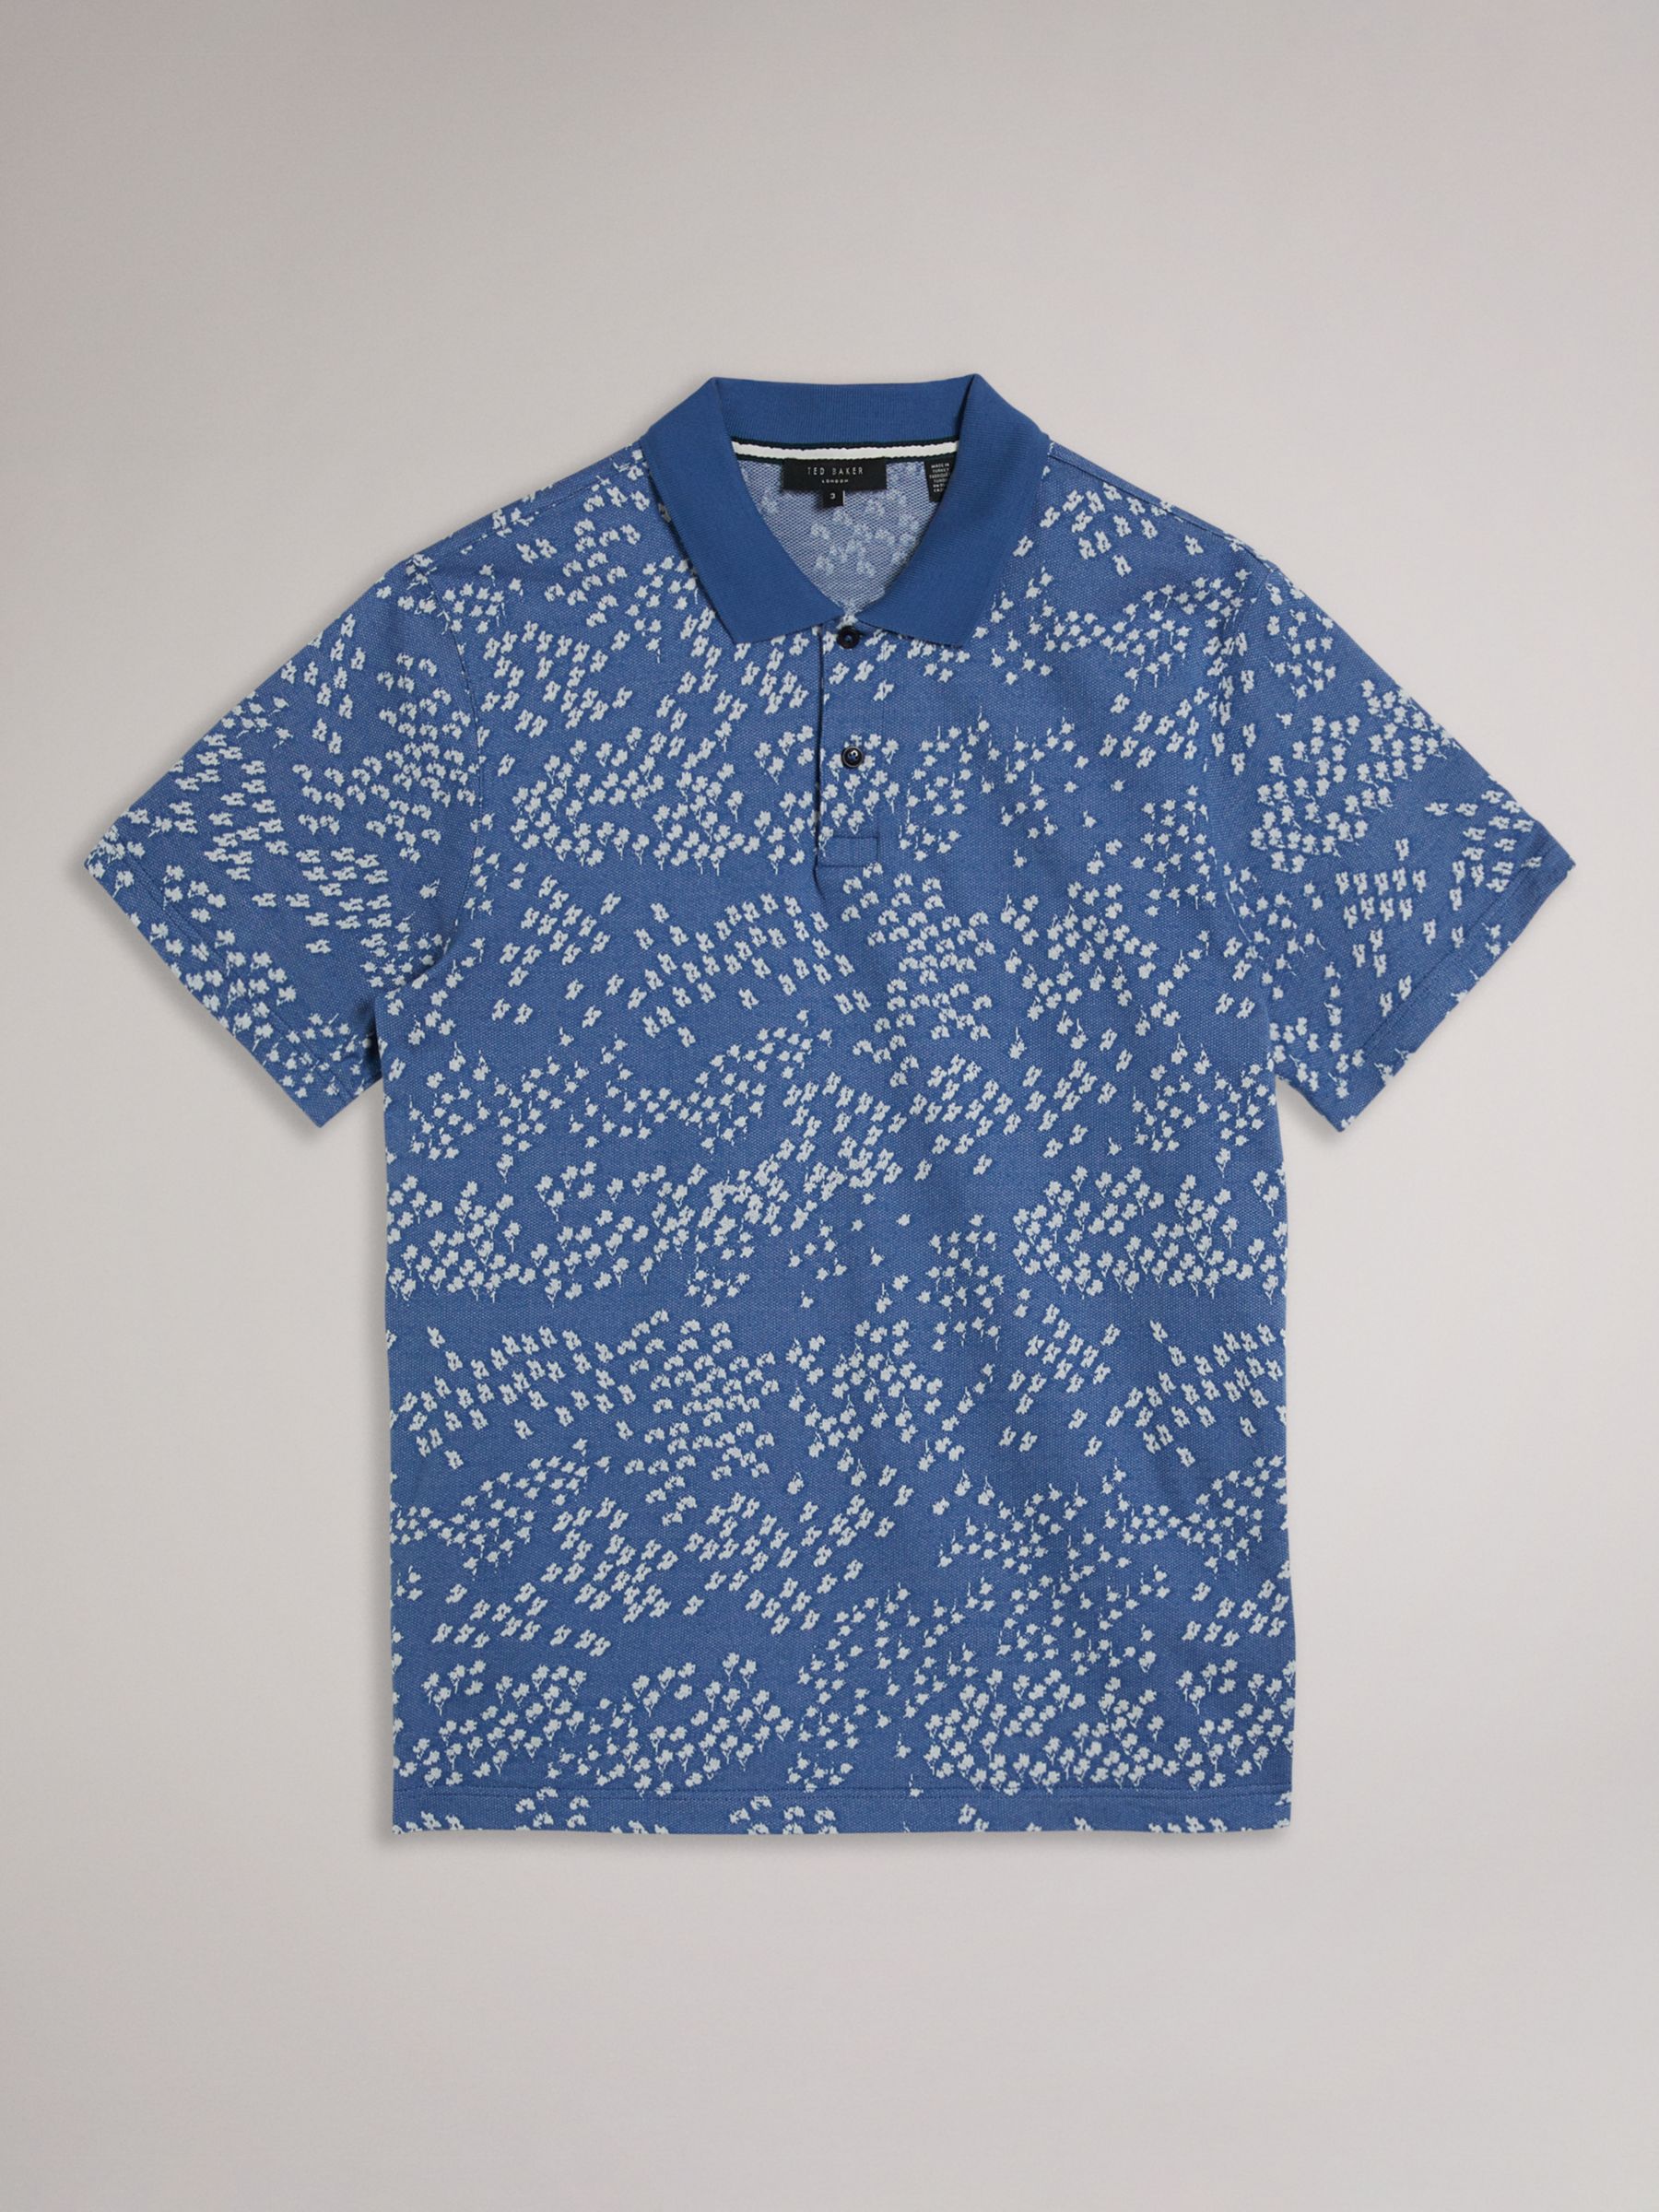 Ted Baker Pacita All-Over Floral Jacquard Polo Shirt, Light Blue, L